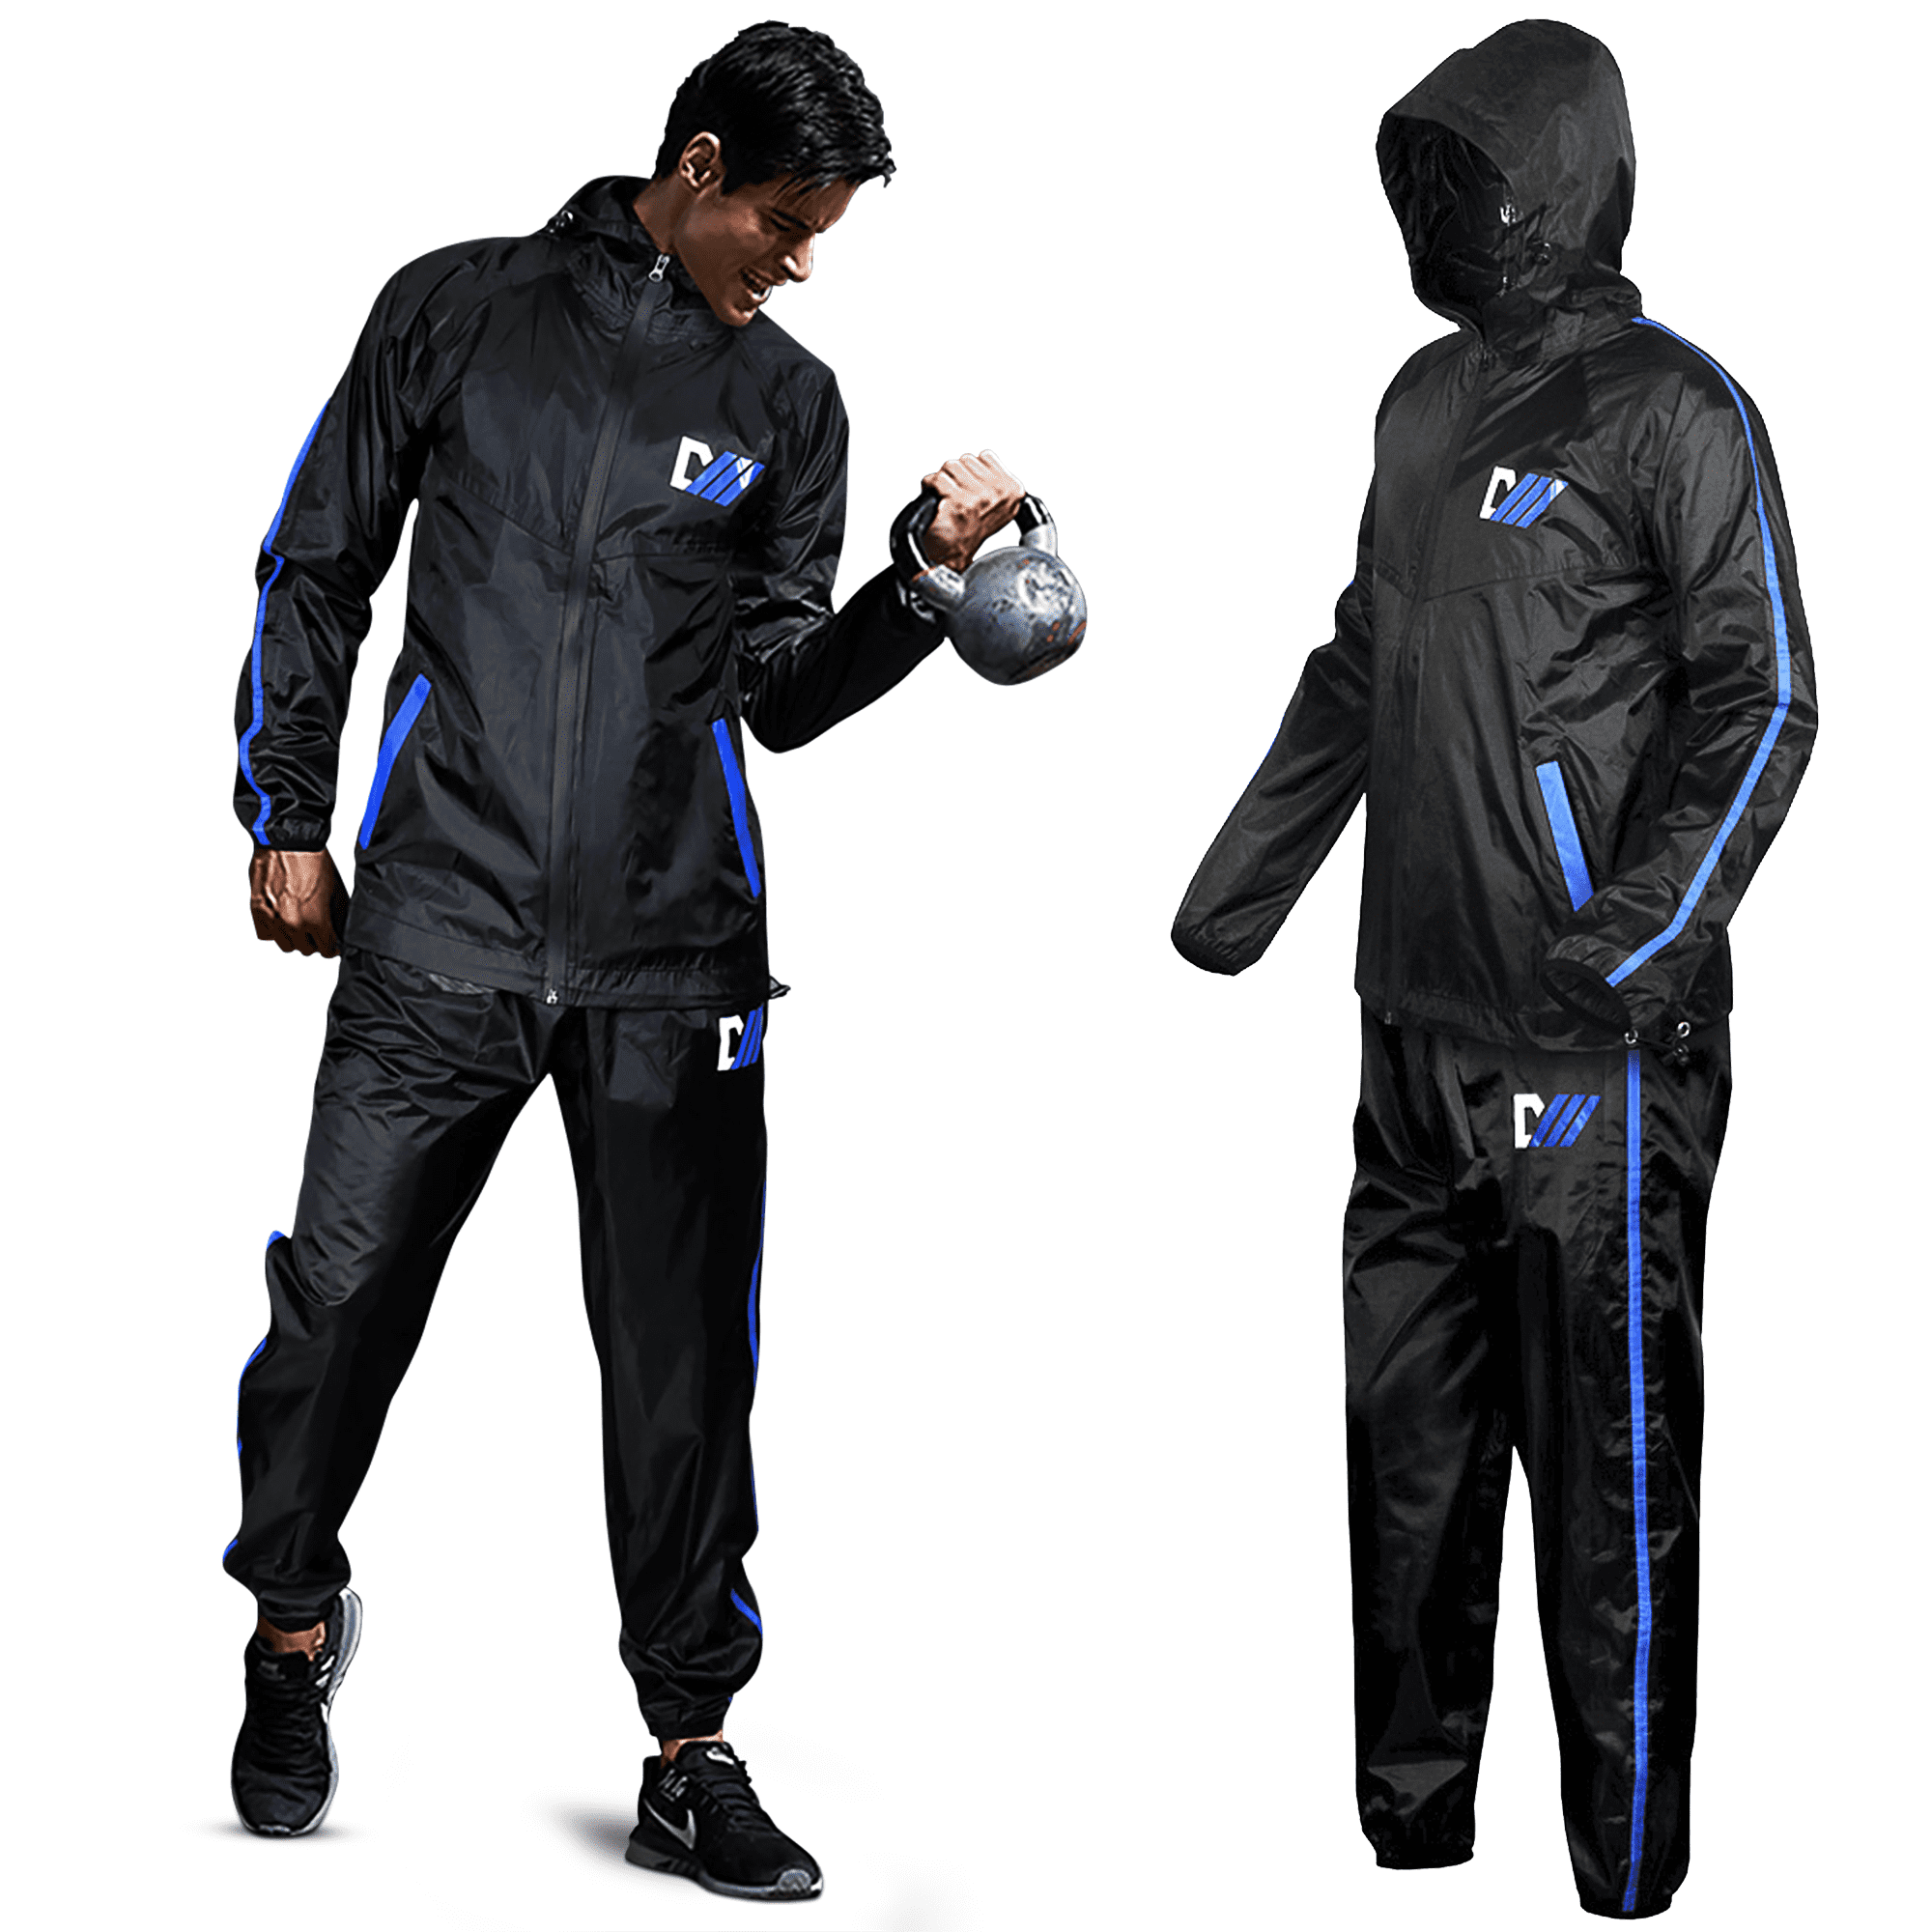 Volt Heavy Duty Sweat Suit Sauna Exercise Gym Suit Fitness Weight Loss Anti-Rip 